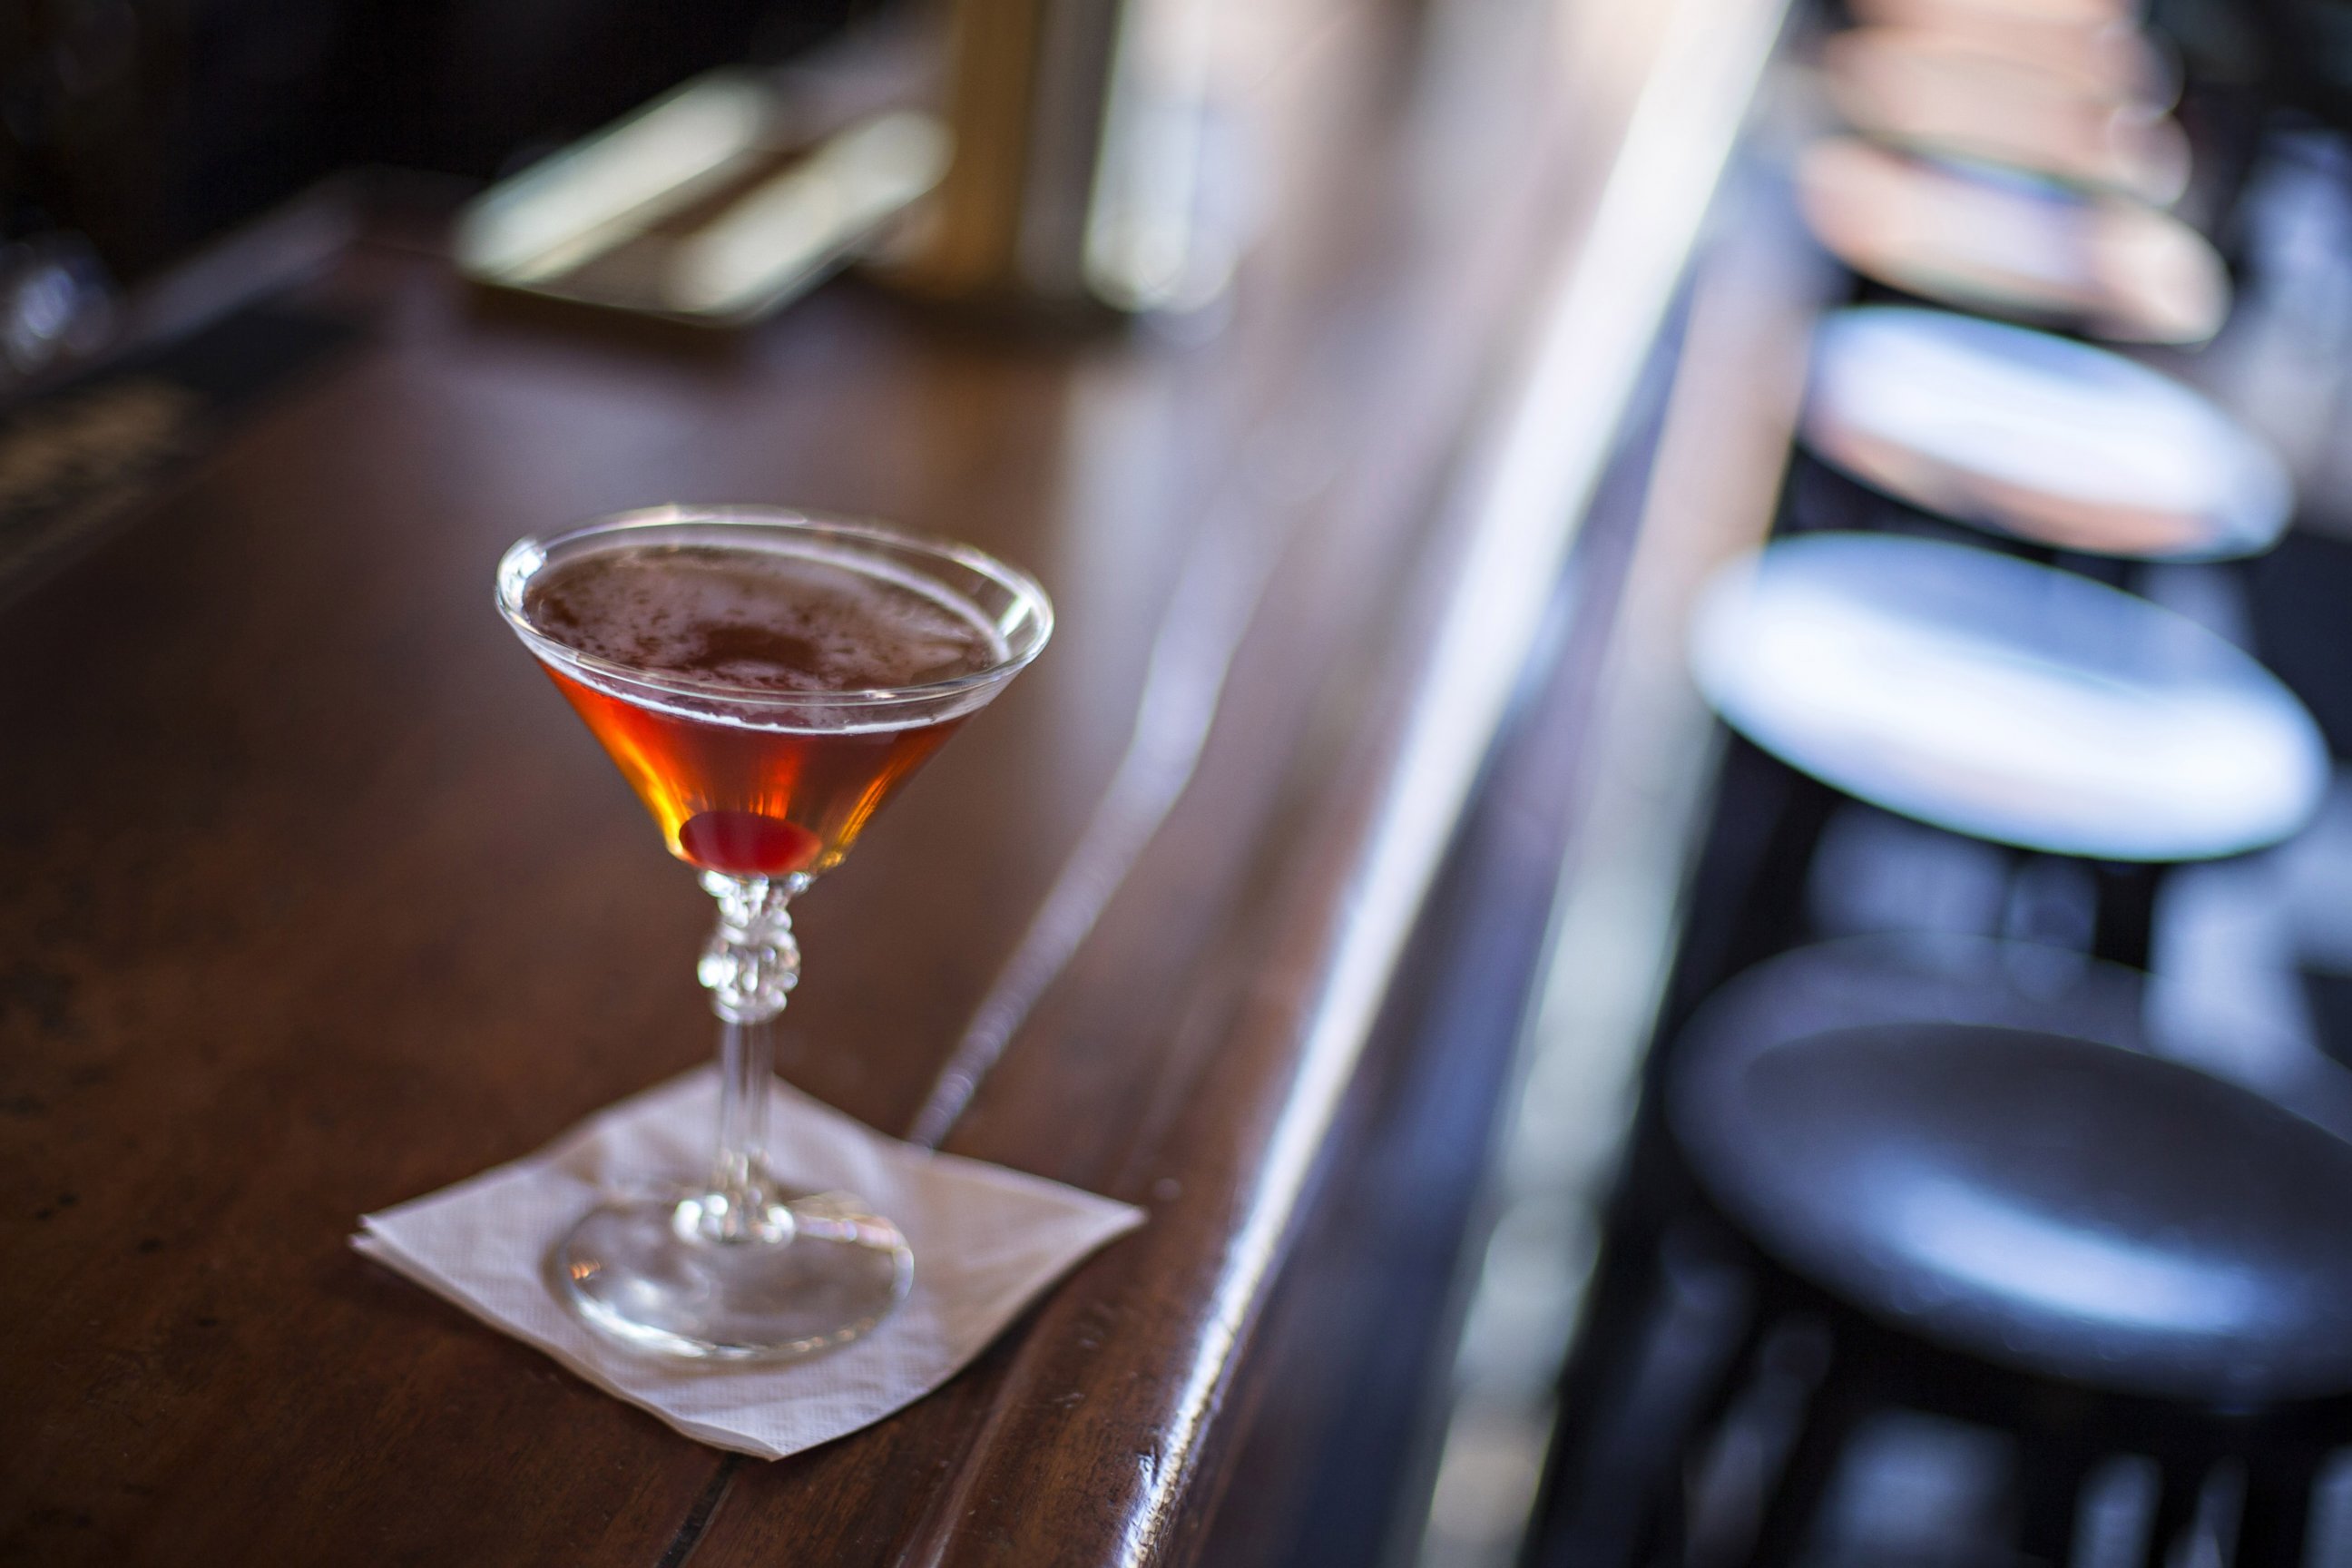 PHOTO: A Manhattan cocktail is seen in this stock image.